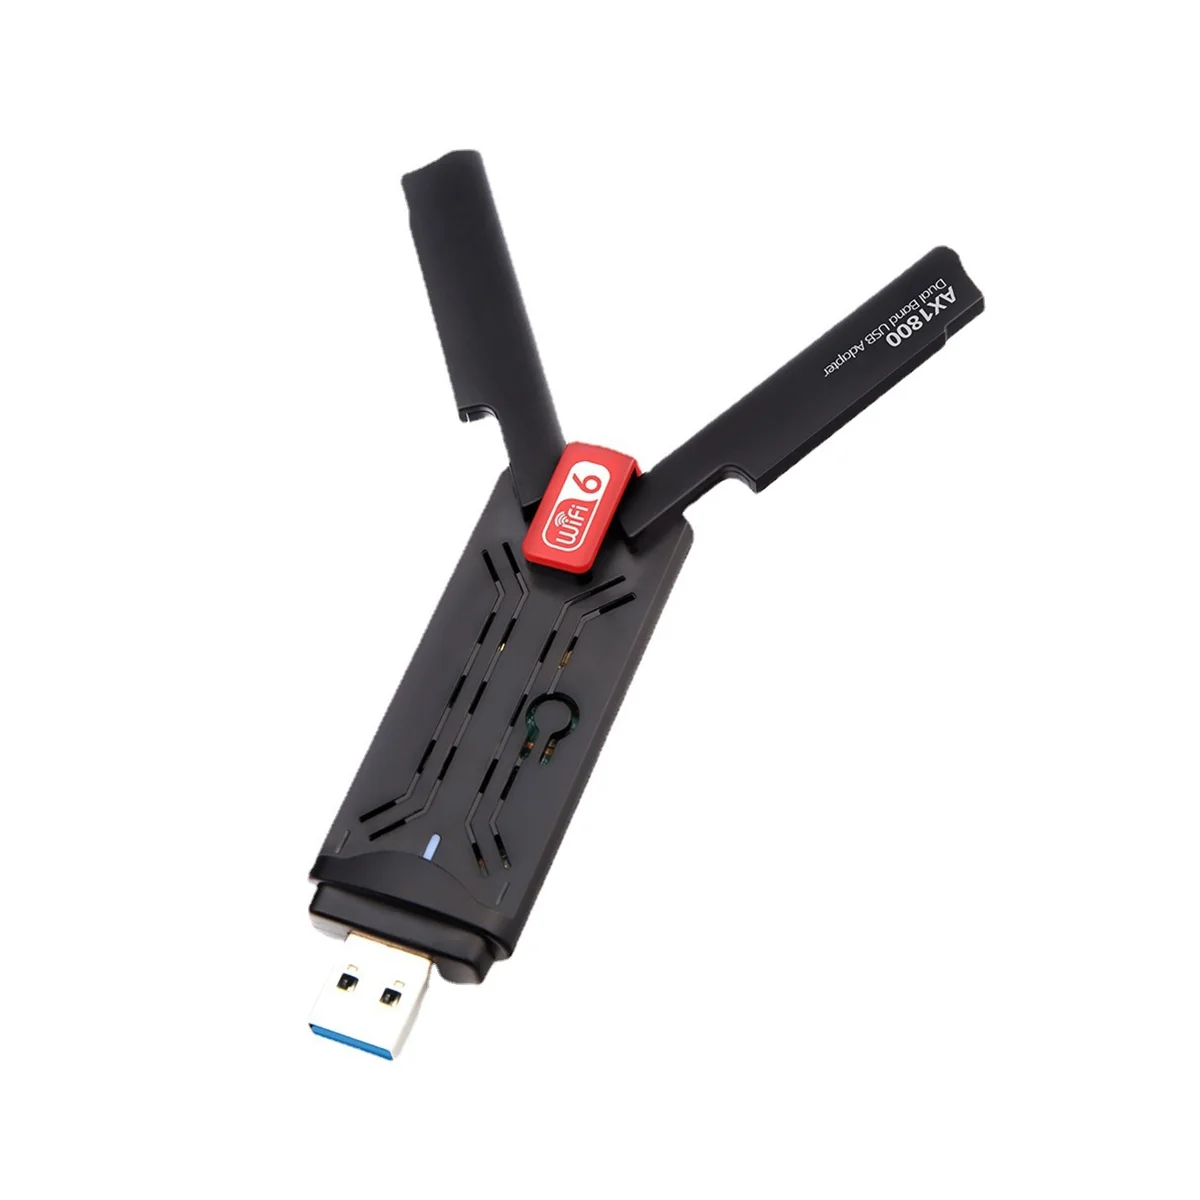 

1800Mbps Wifi 6 USB 3.0 Adapter 2.4G 5.8G WiFi6 Dongle Network Card Support Win 7 10 11 PC